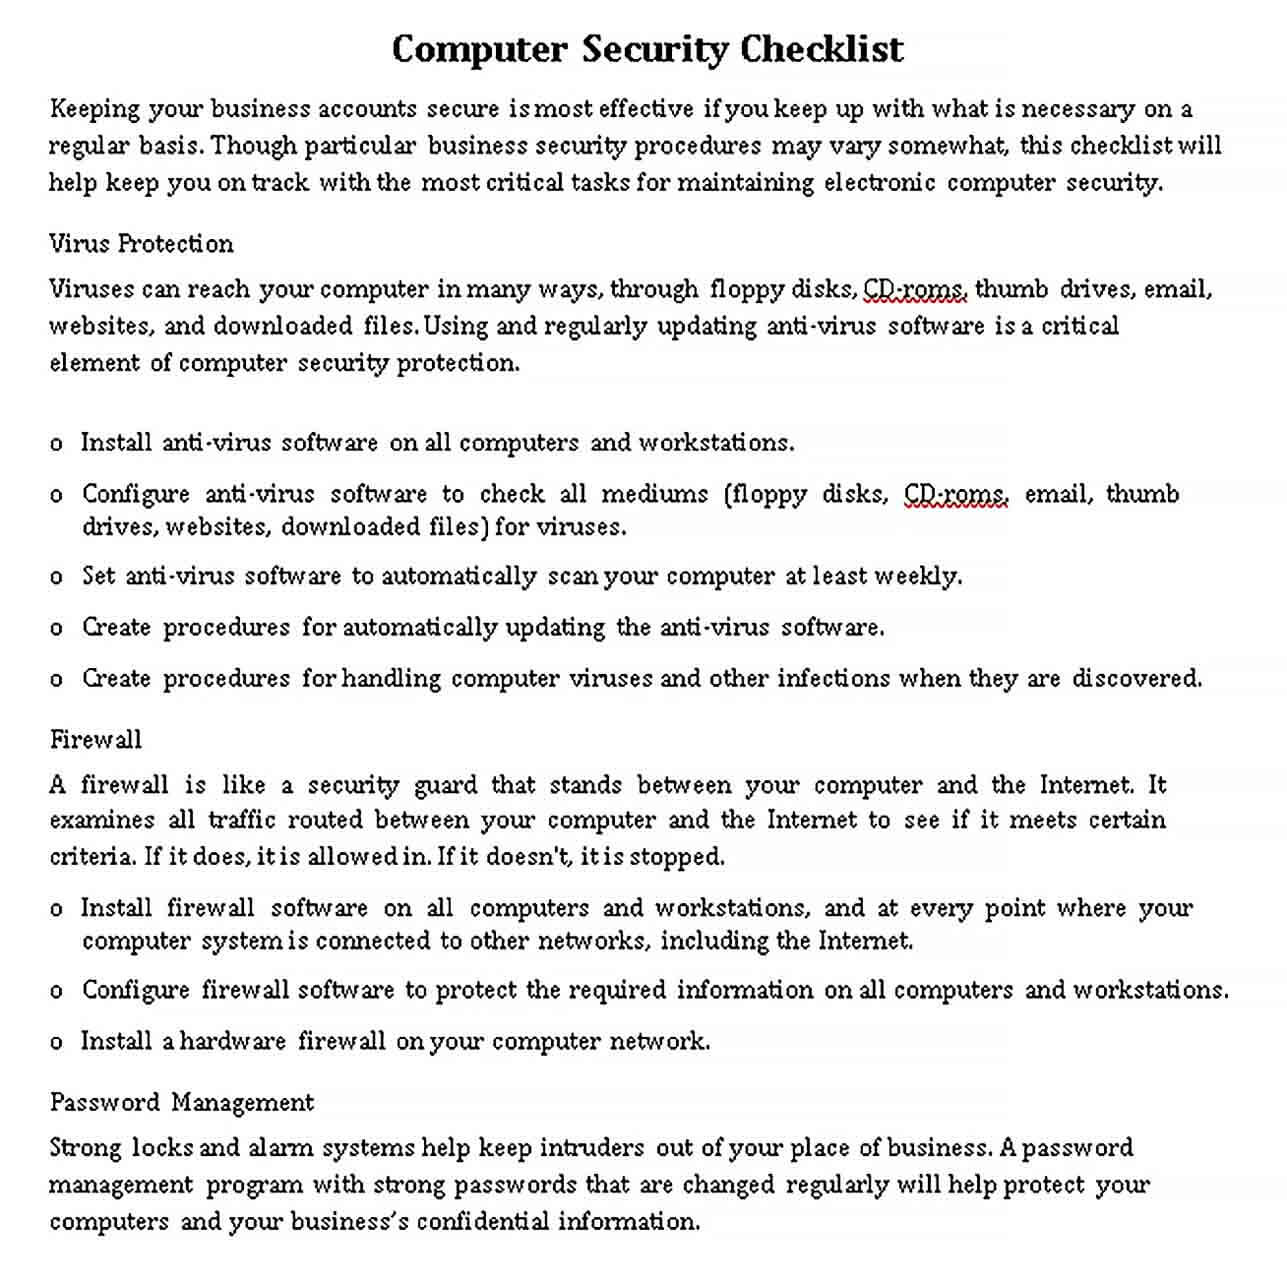 Sample Computer Security Checklist Template